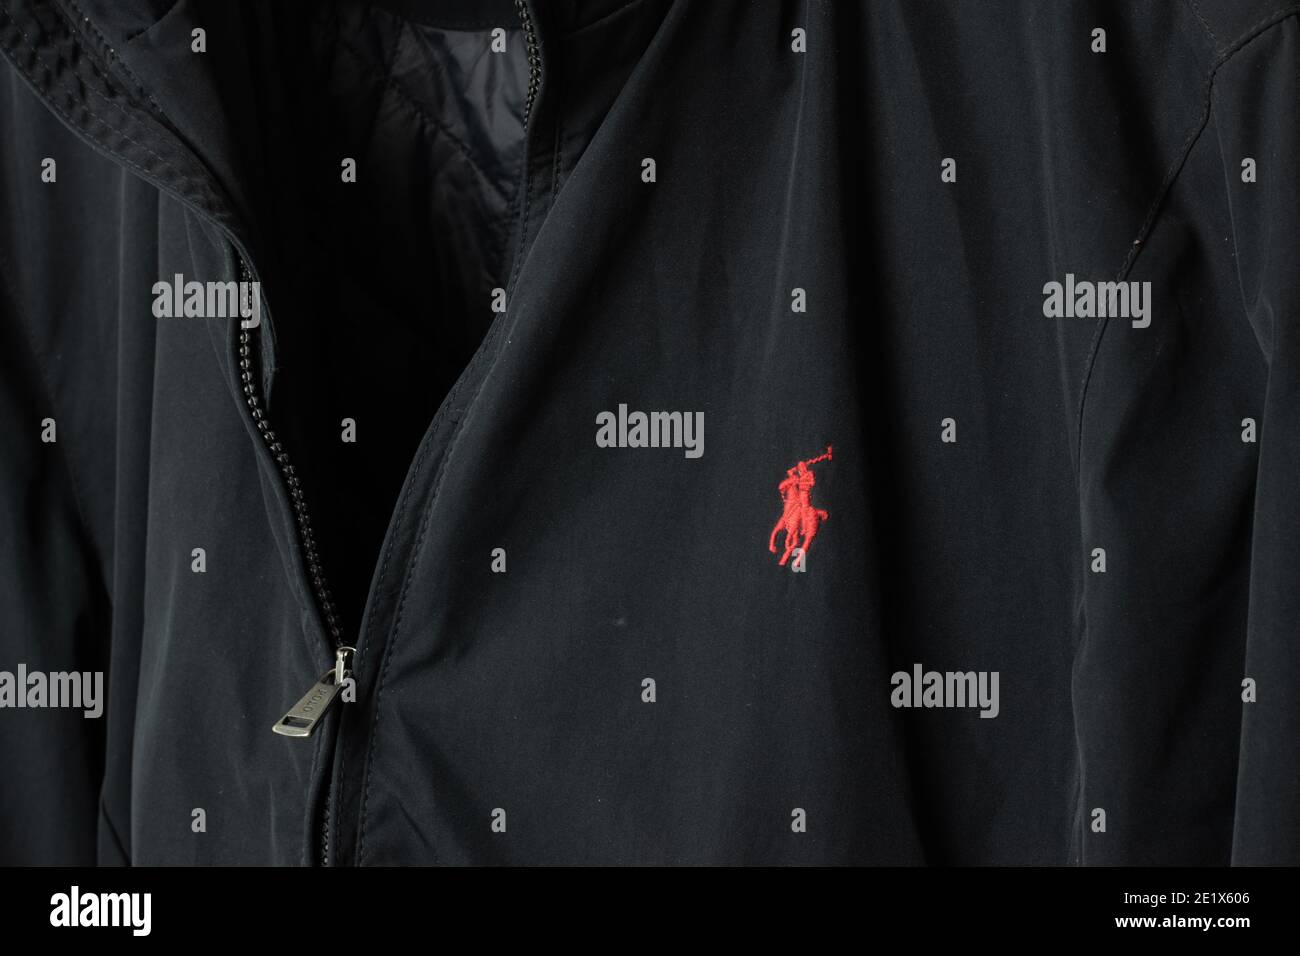 Moscow, Russia - 5 December 2020: Red Polo Ralph Lauren logo symbol on  black jacket, Illustrative Editorial Stock Photo - Alamy